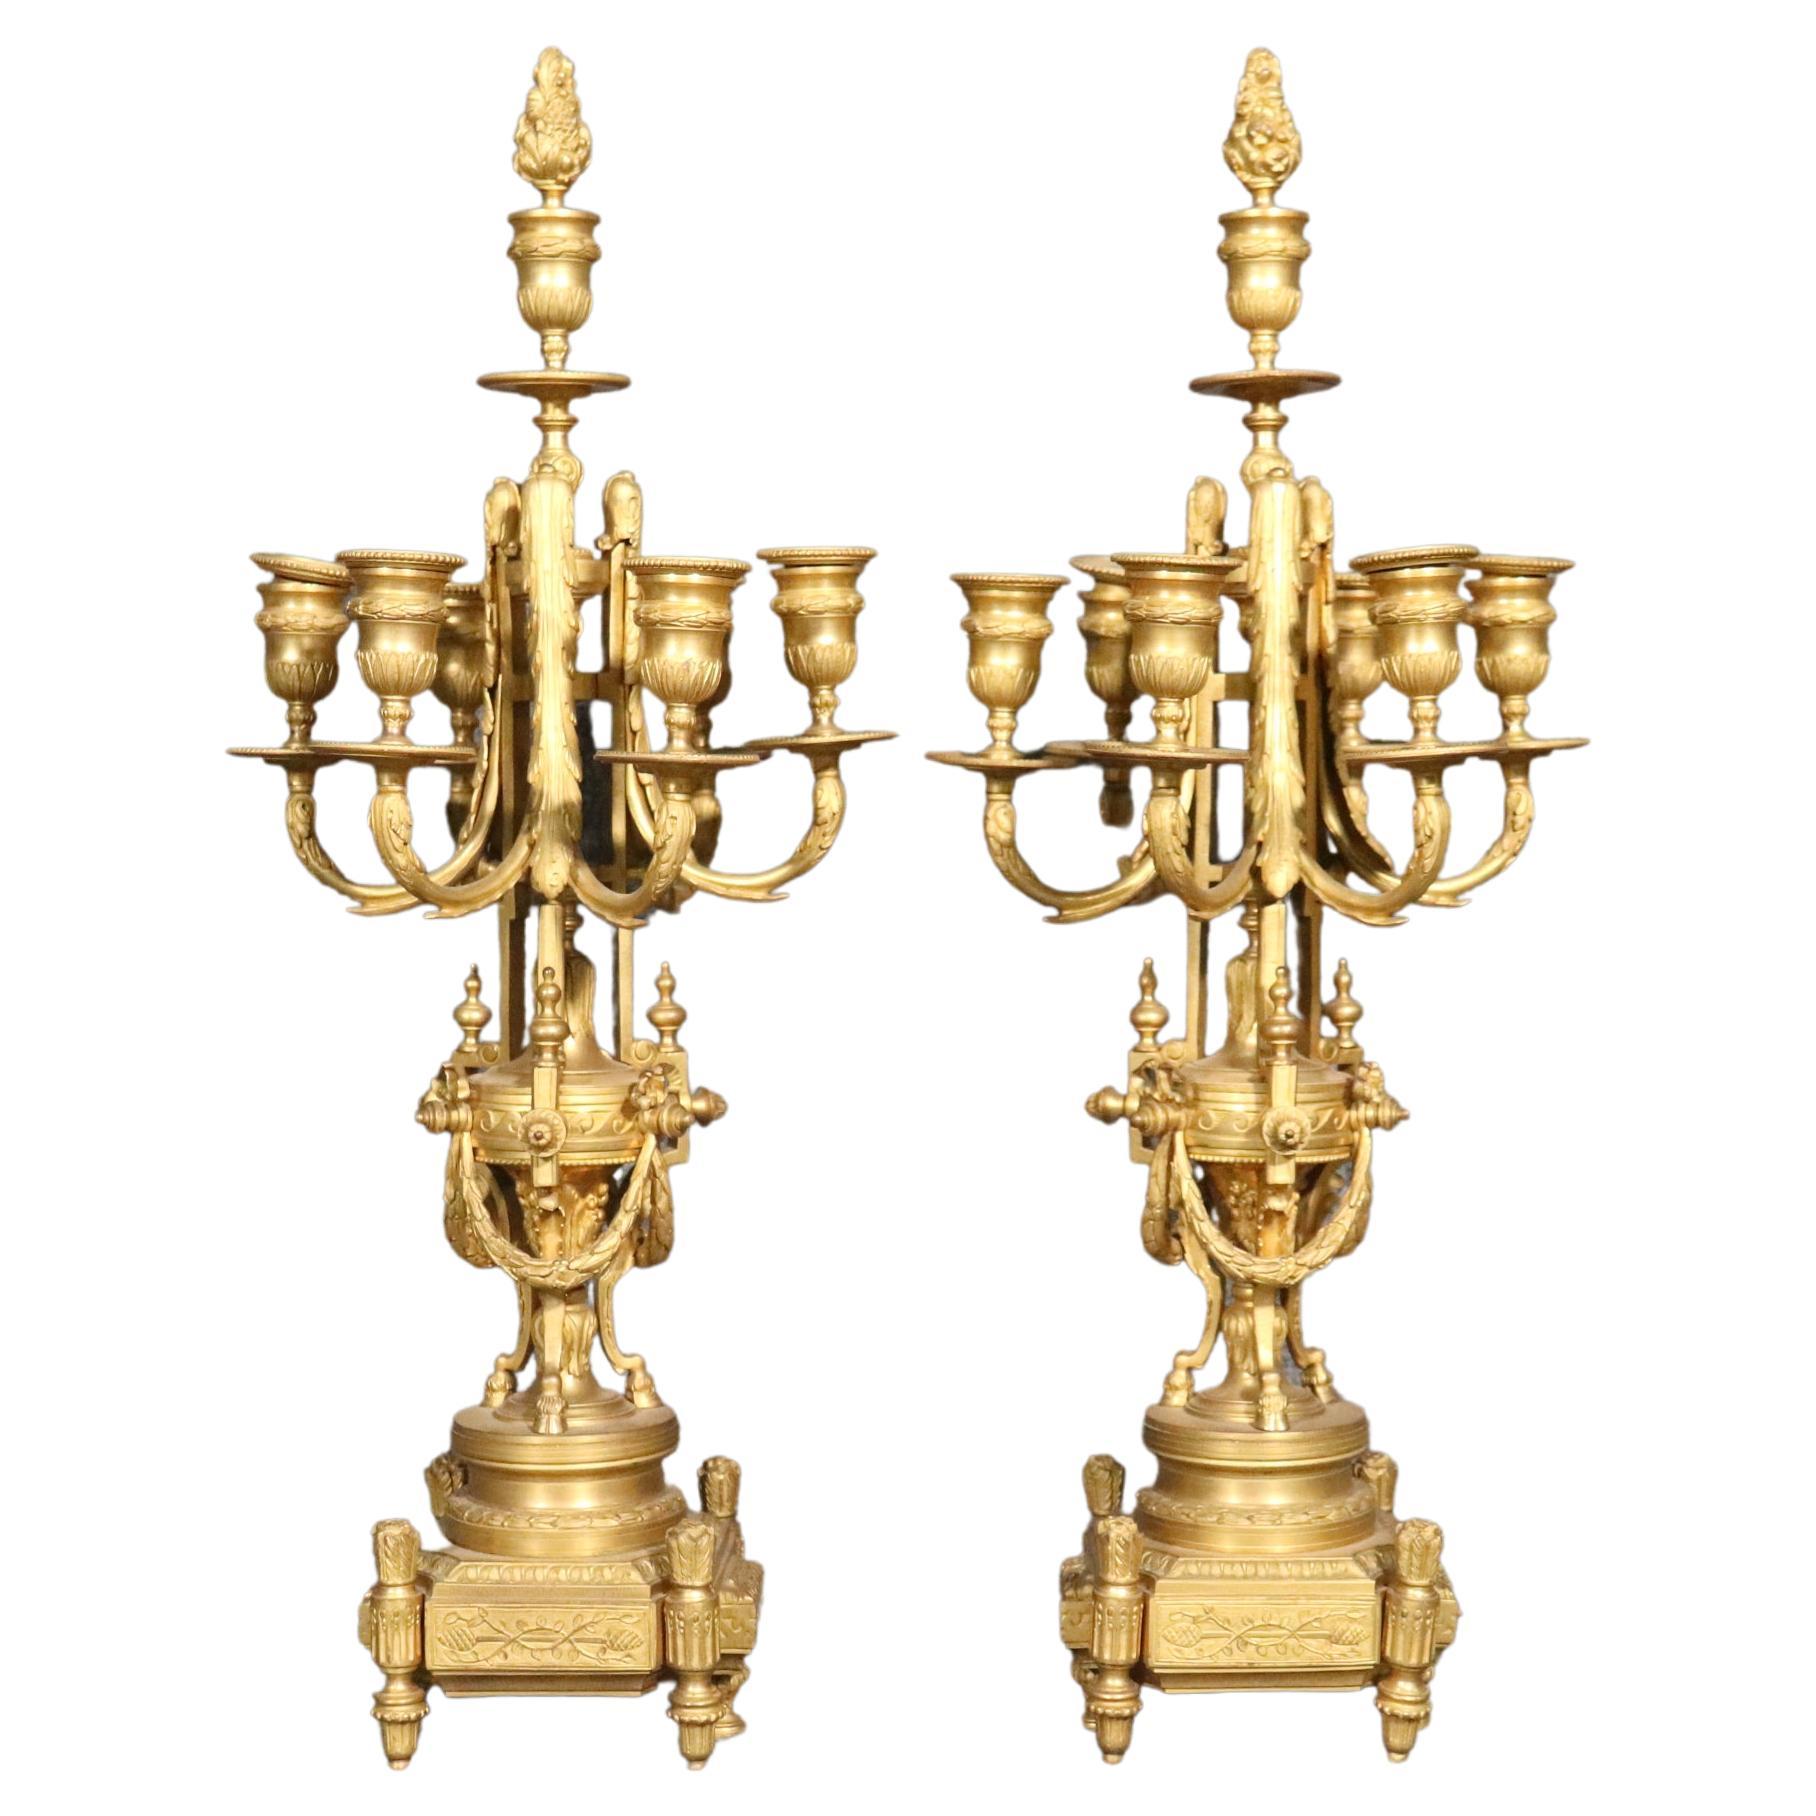 Pair of 19th Century French Louis XVI Style Bronze Ormolu Candelabras For Sale